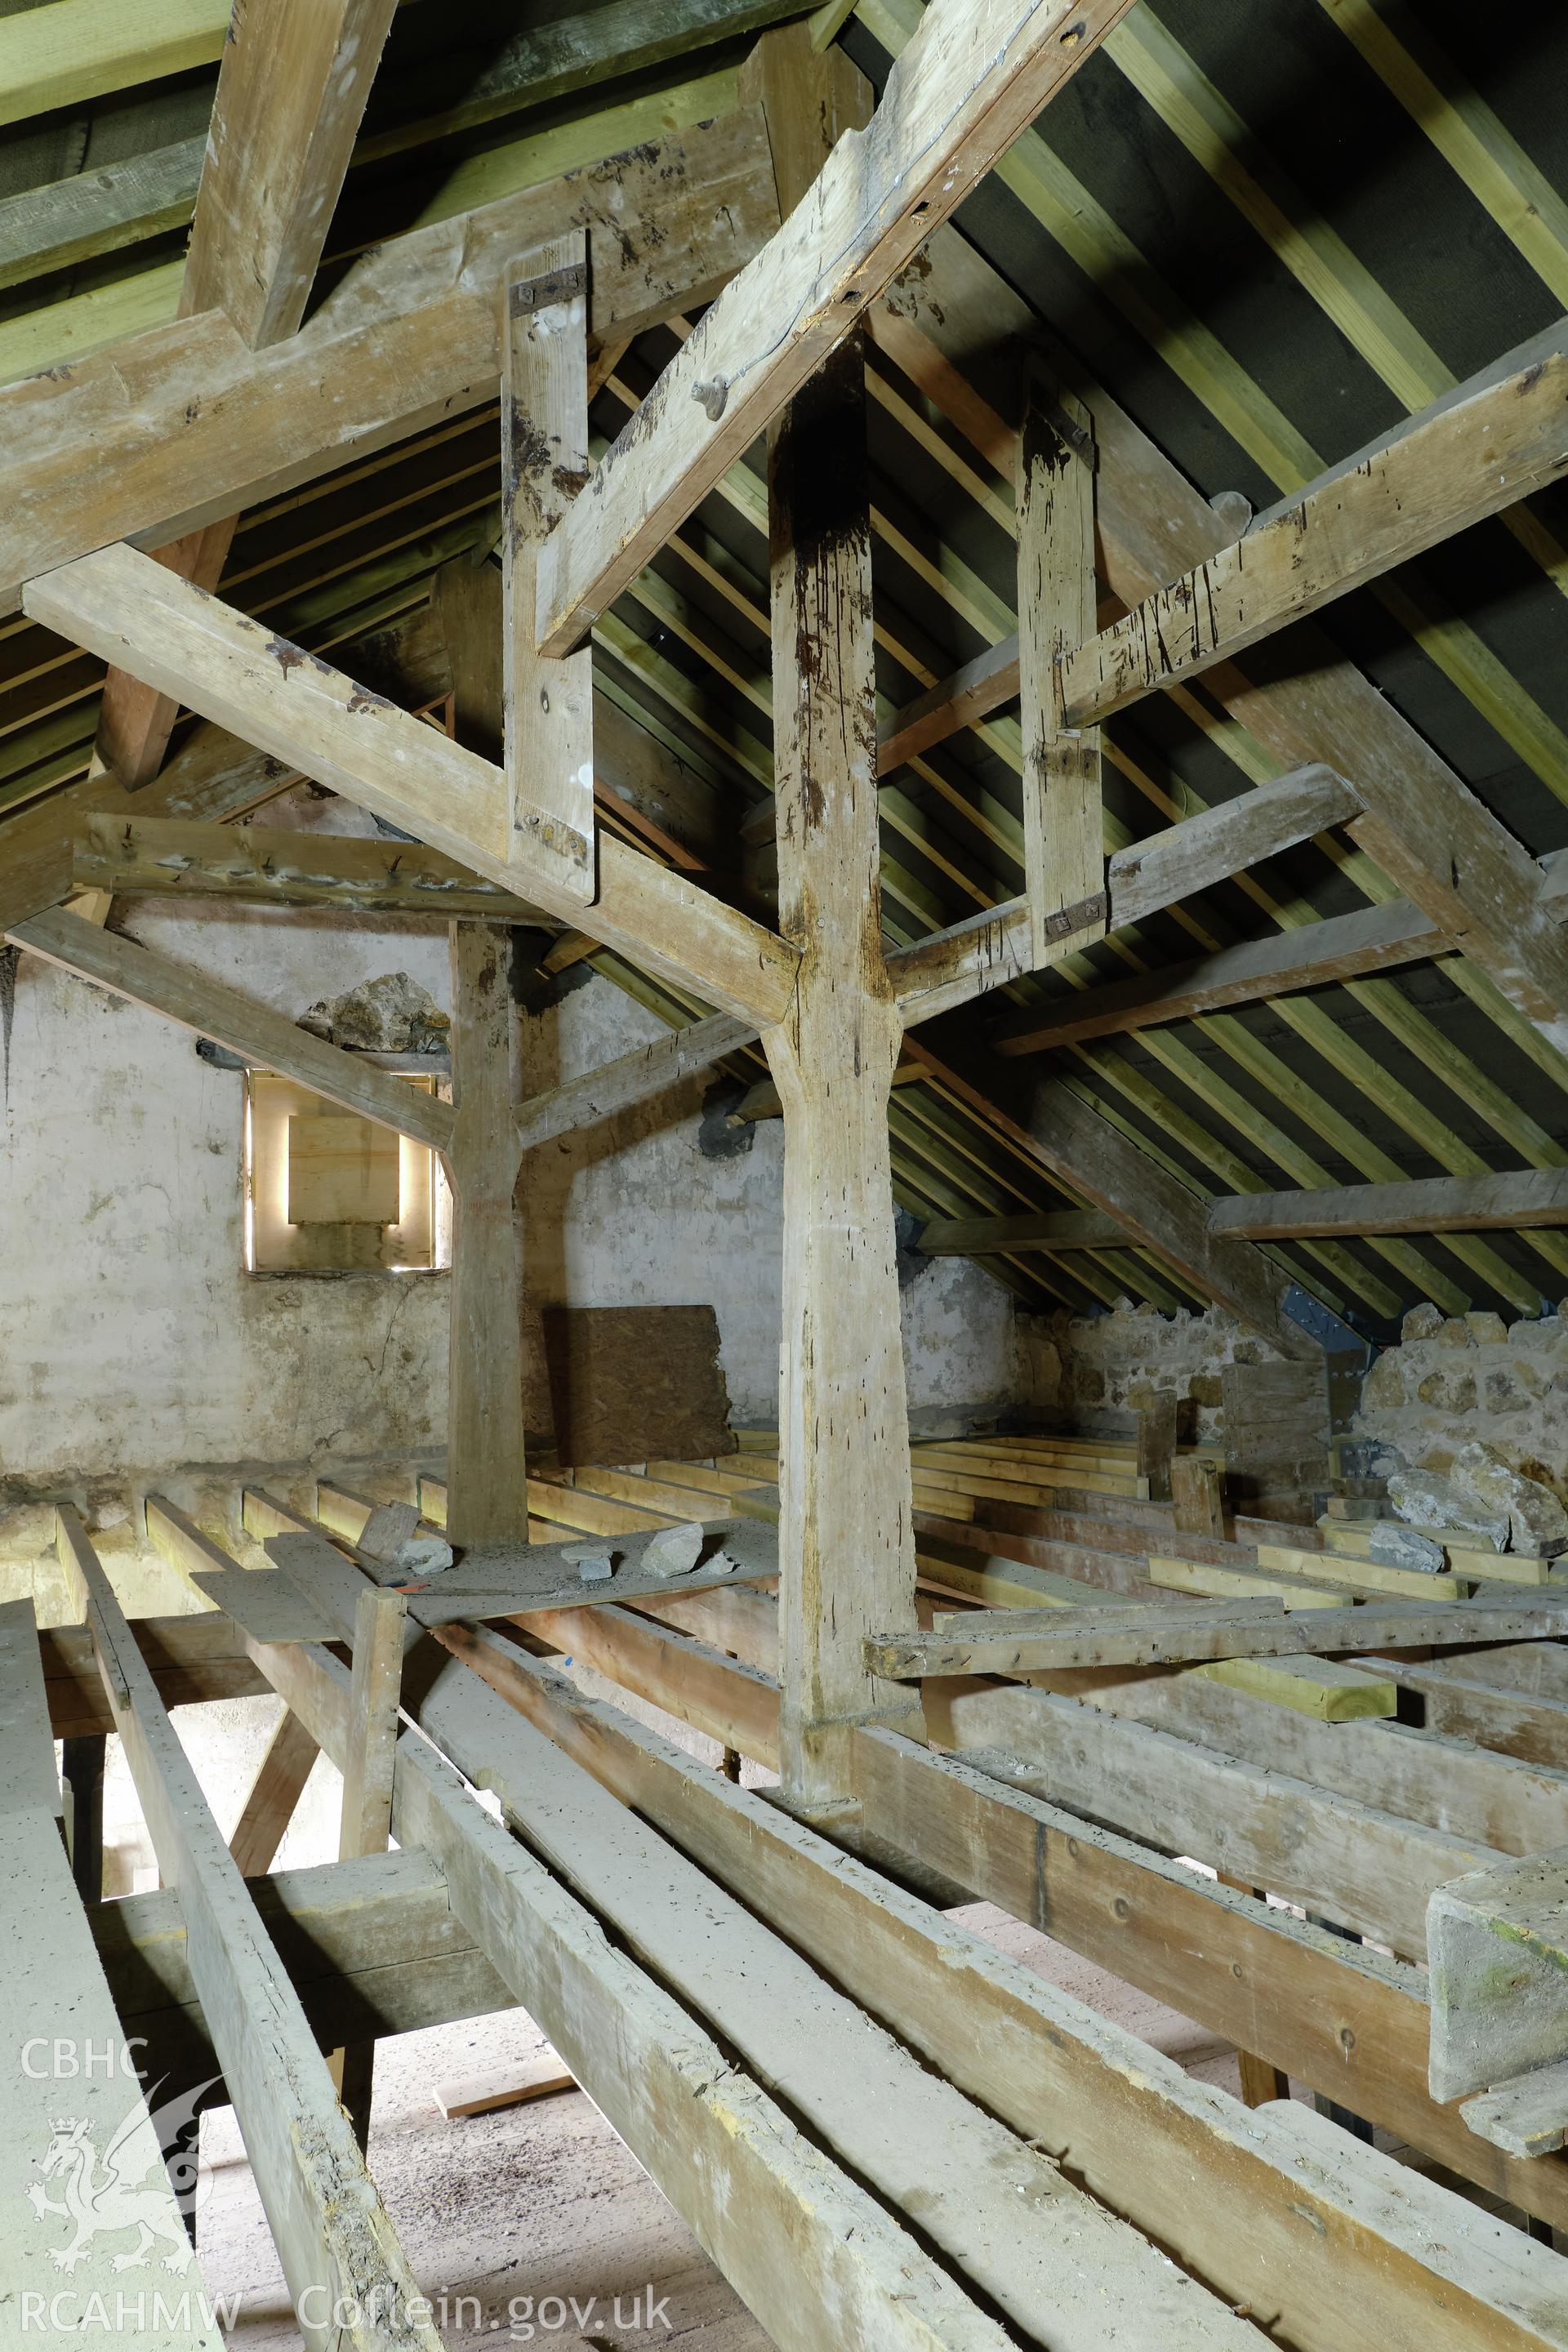 Colour photograph showing Blackpool Mill - attic, looking SW. Produced as part of Historic Building Recording for Blackpool Mill, carried out by Richard Hayman, June 2021.